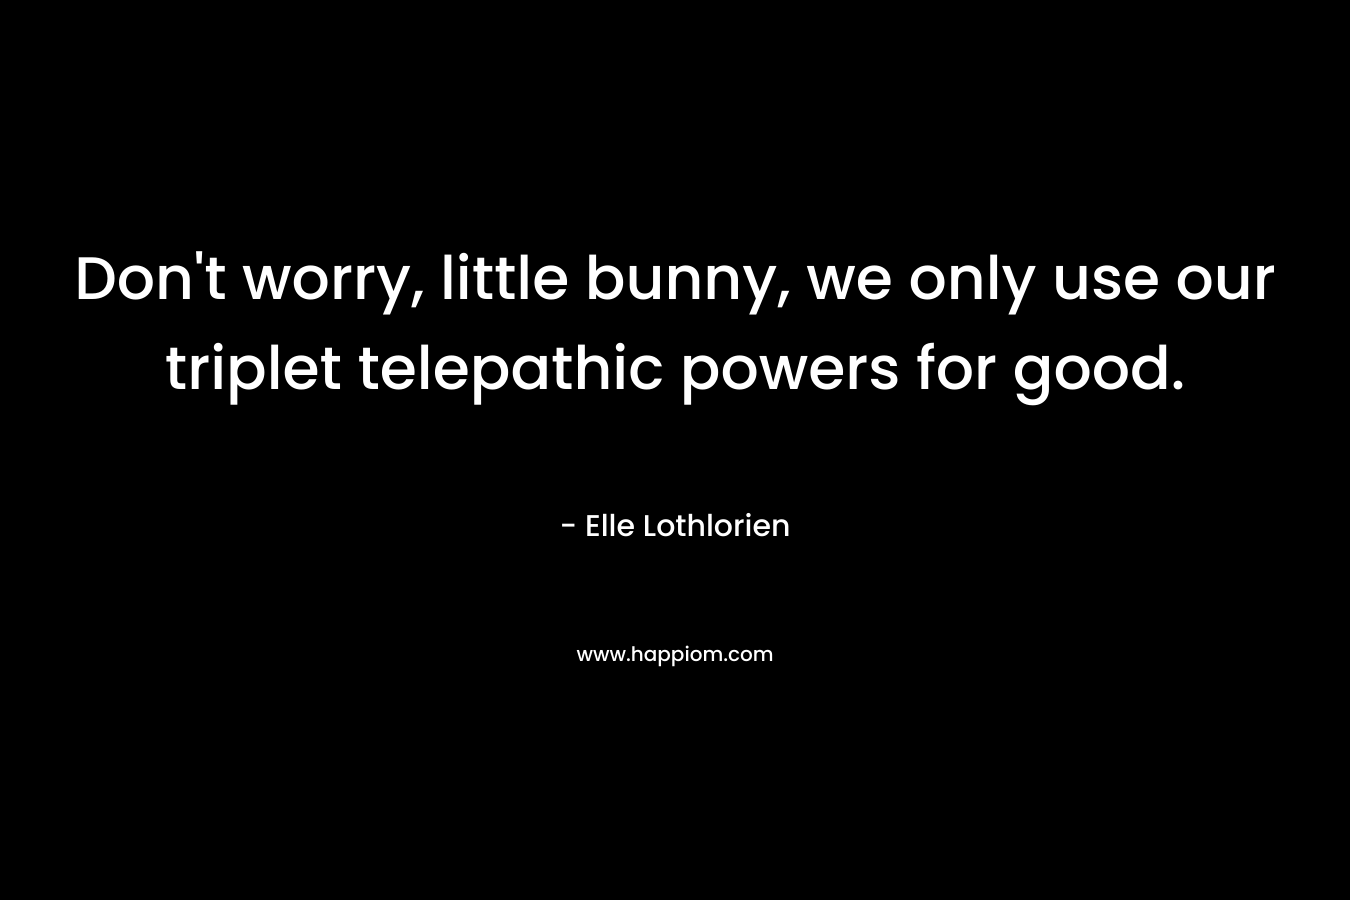 Don't worry, little bunny, we only use our triplet telepathic powers for good.